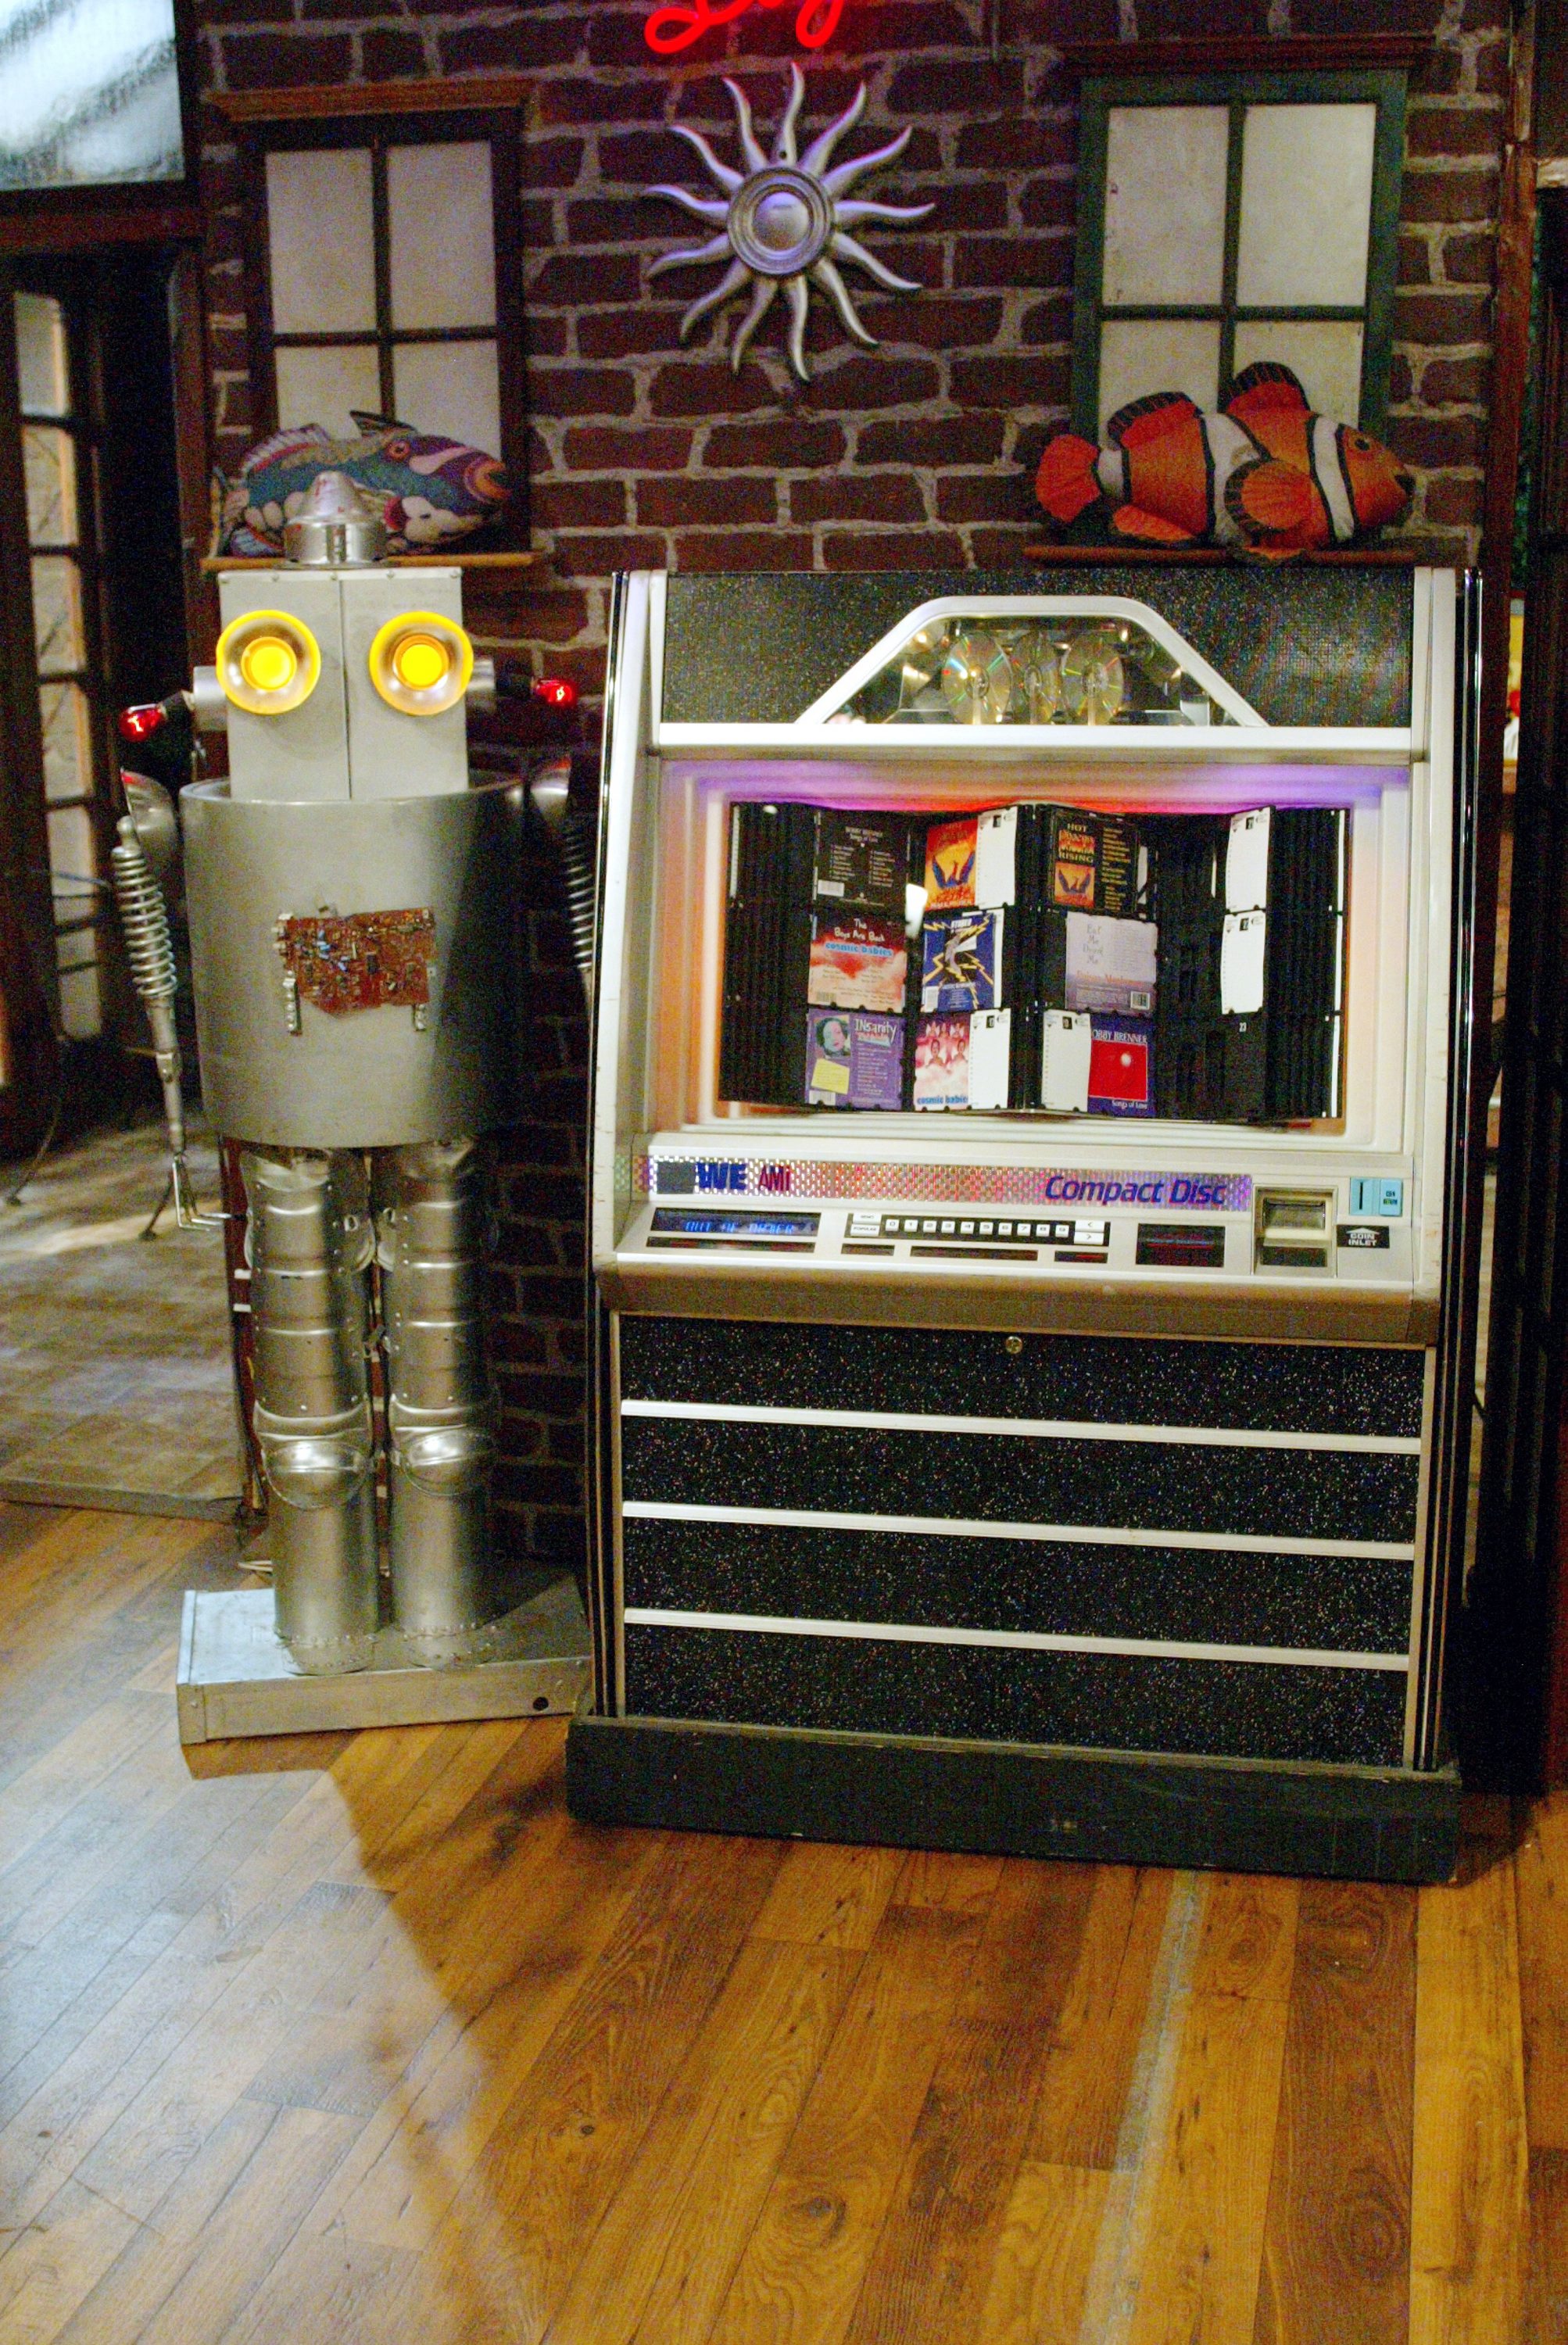 Robot and the Jukebox